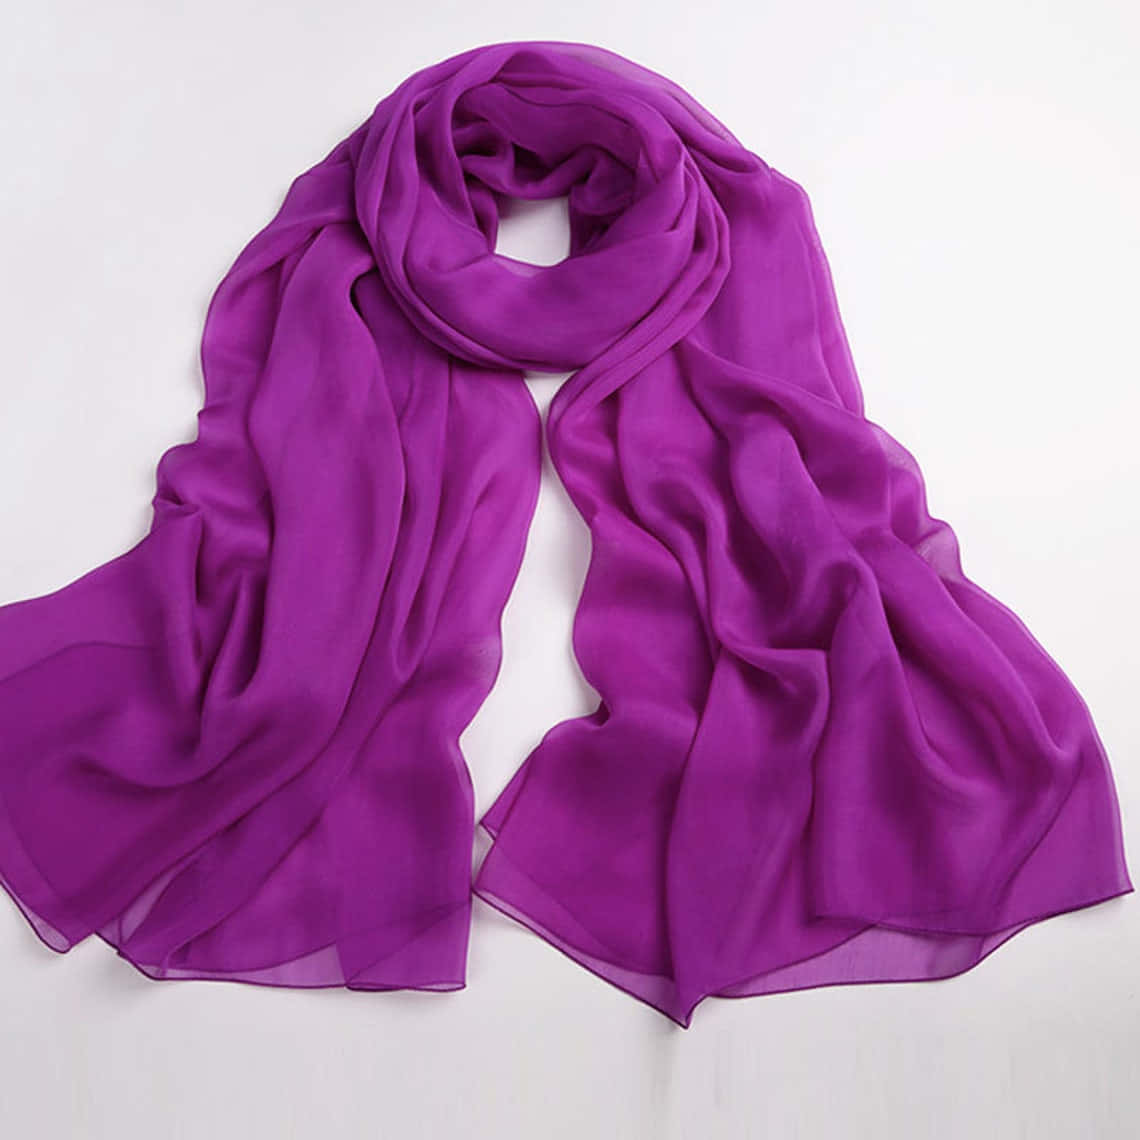 "Keep warm in style with this beautiful purple scarf" Wallpaper